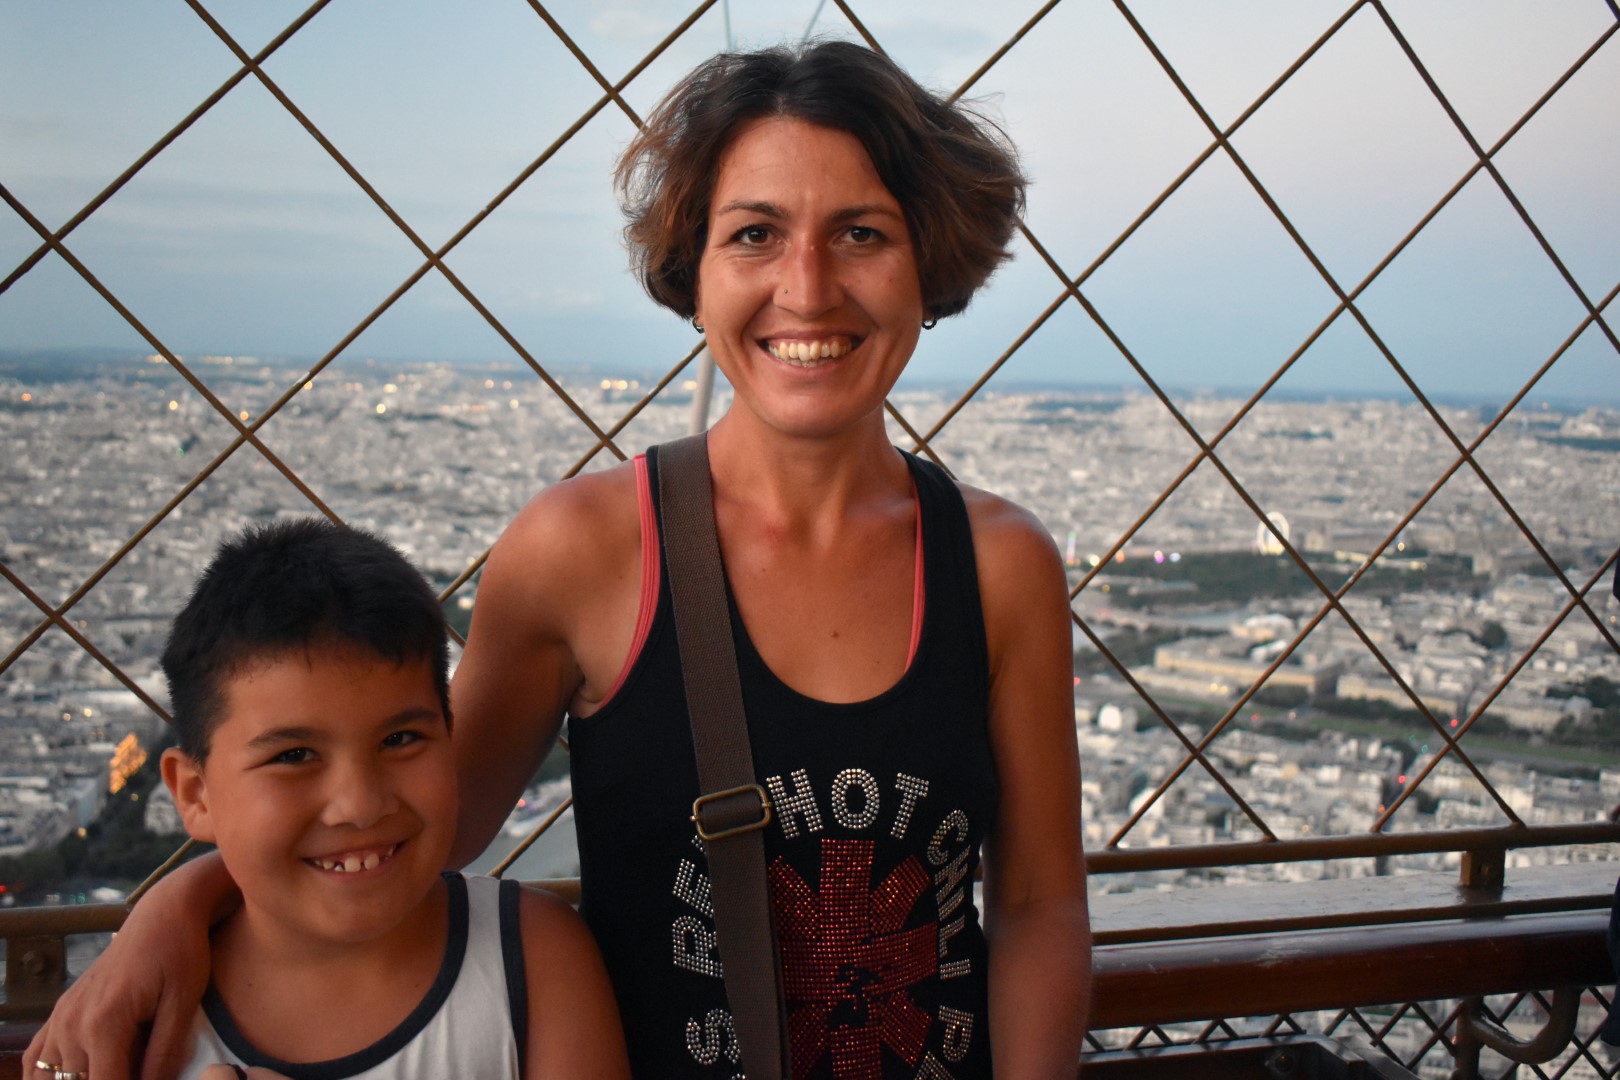 Top of the Eiffel Tower, Paris